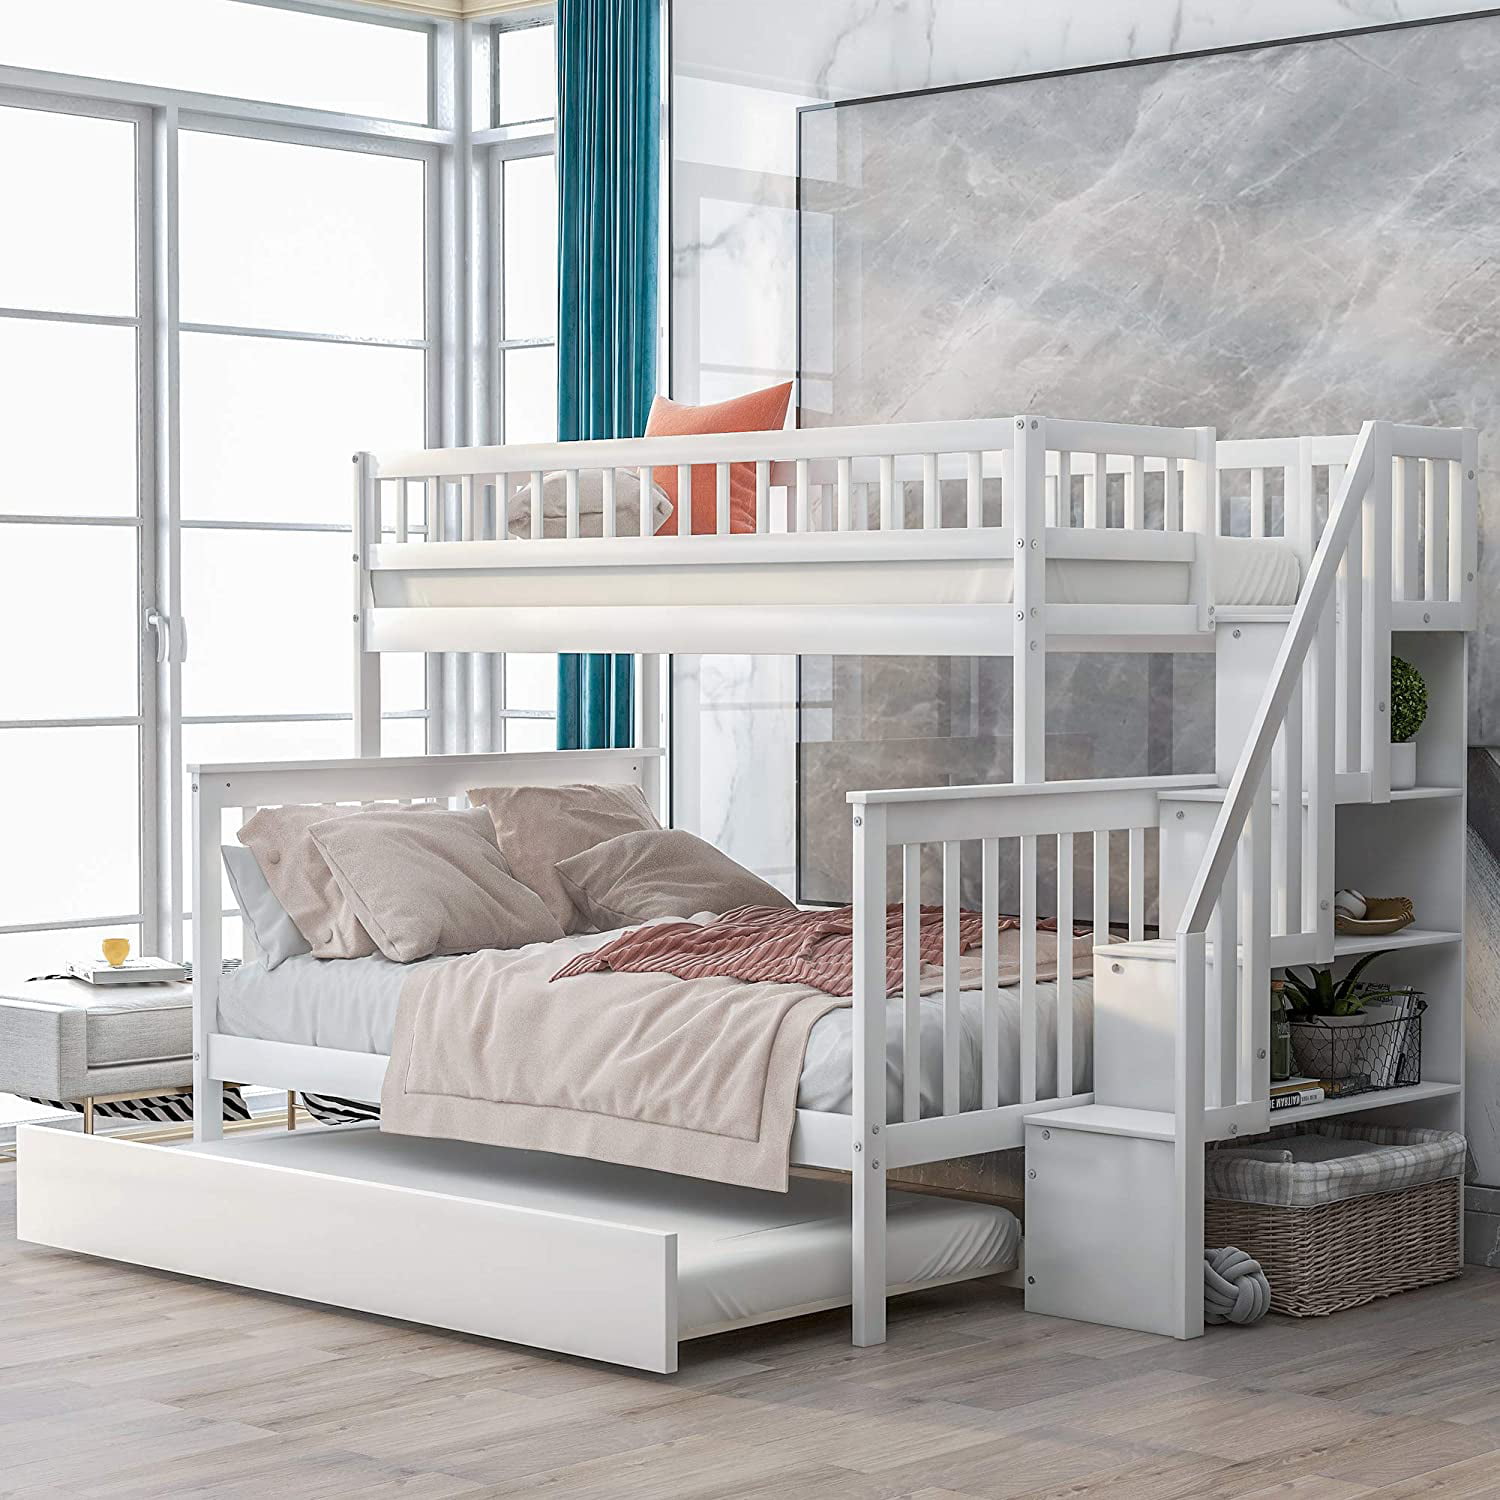 Piscis Bunk Bed Beds Twin Over, Wood You Bunk Beds